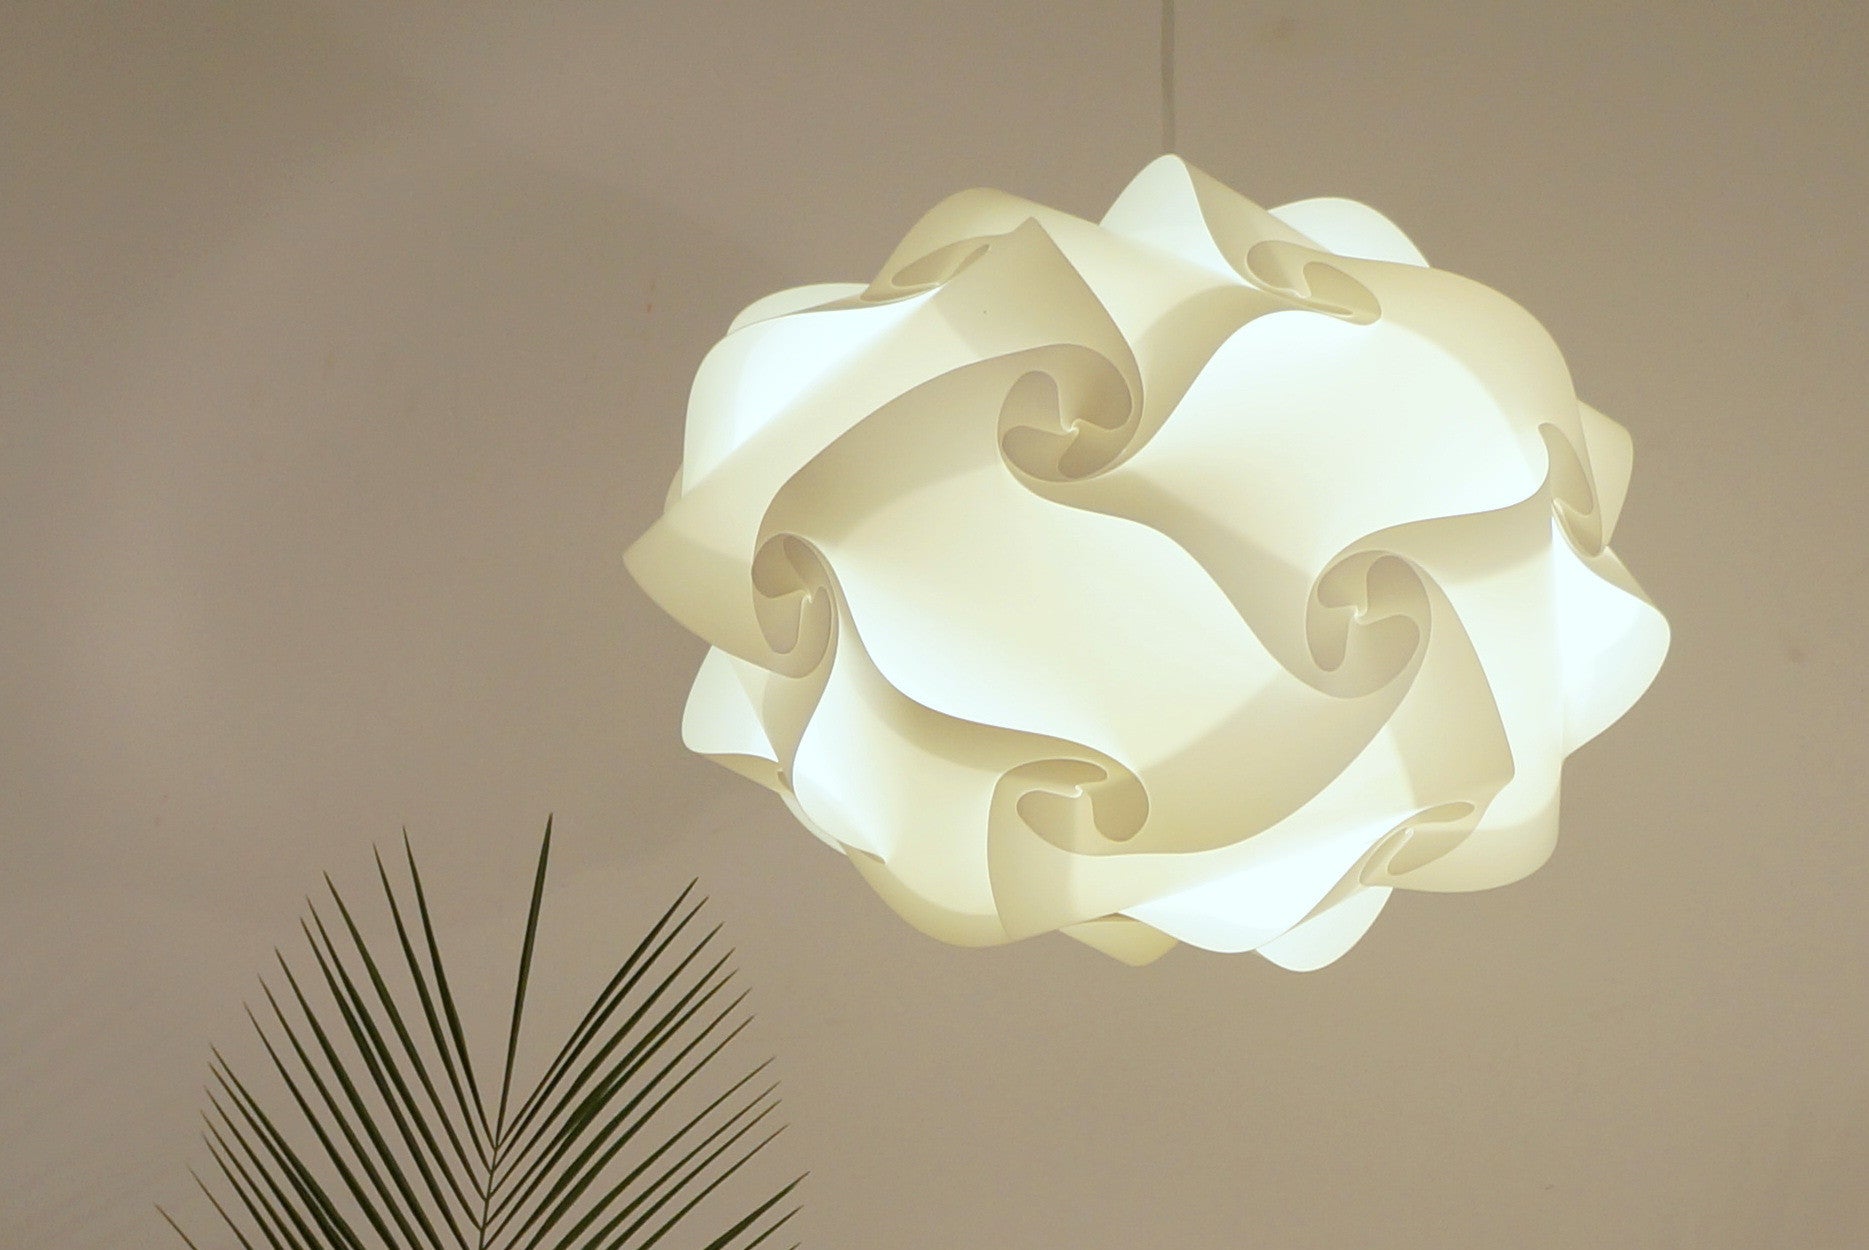 Smarty Lamps Tukia Ceiling Light Shade  Smart Deco Homeware Lighting and Art by Jacqueline hammond